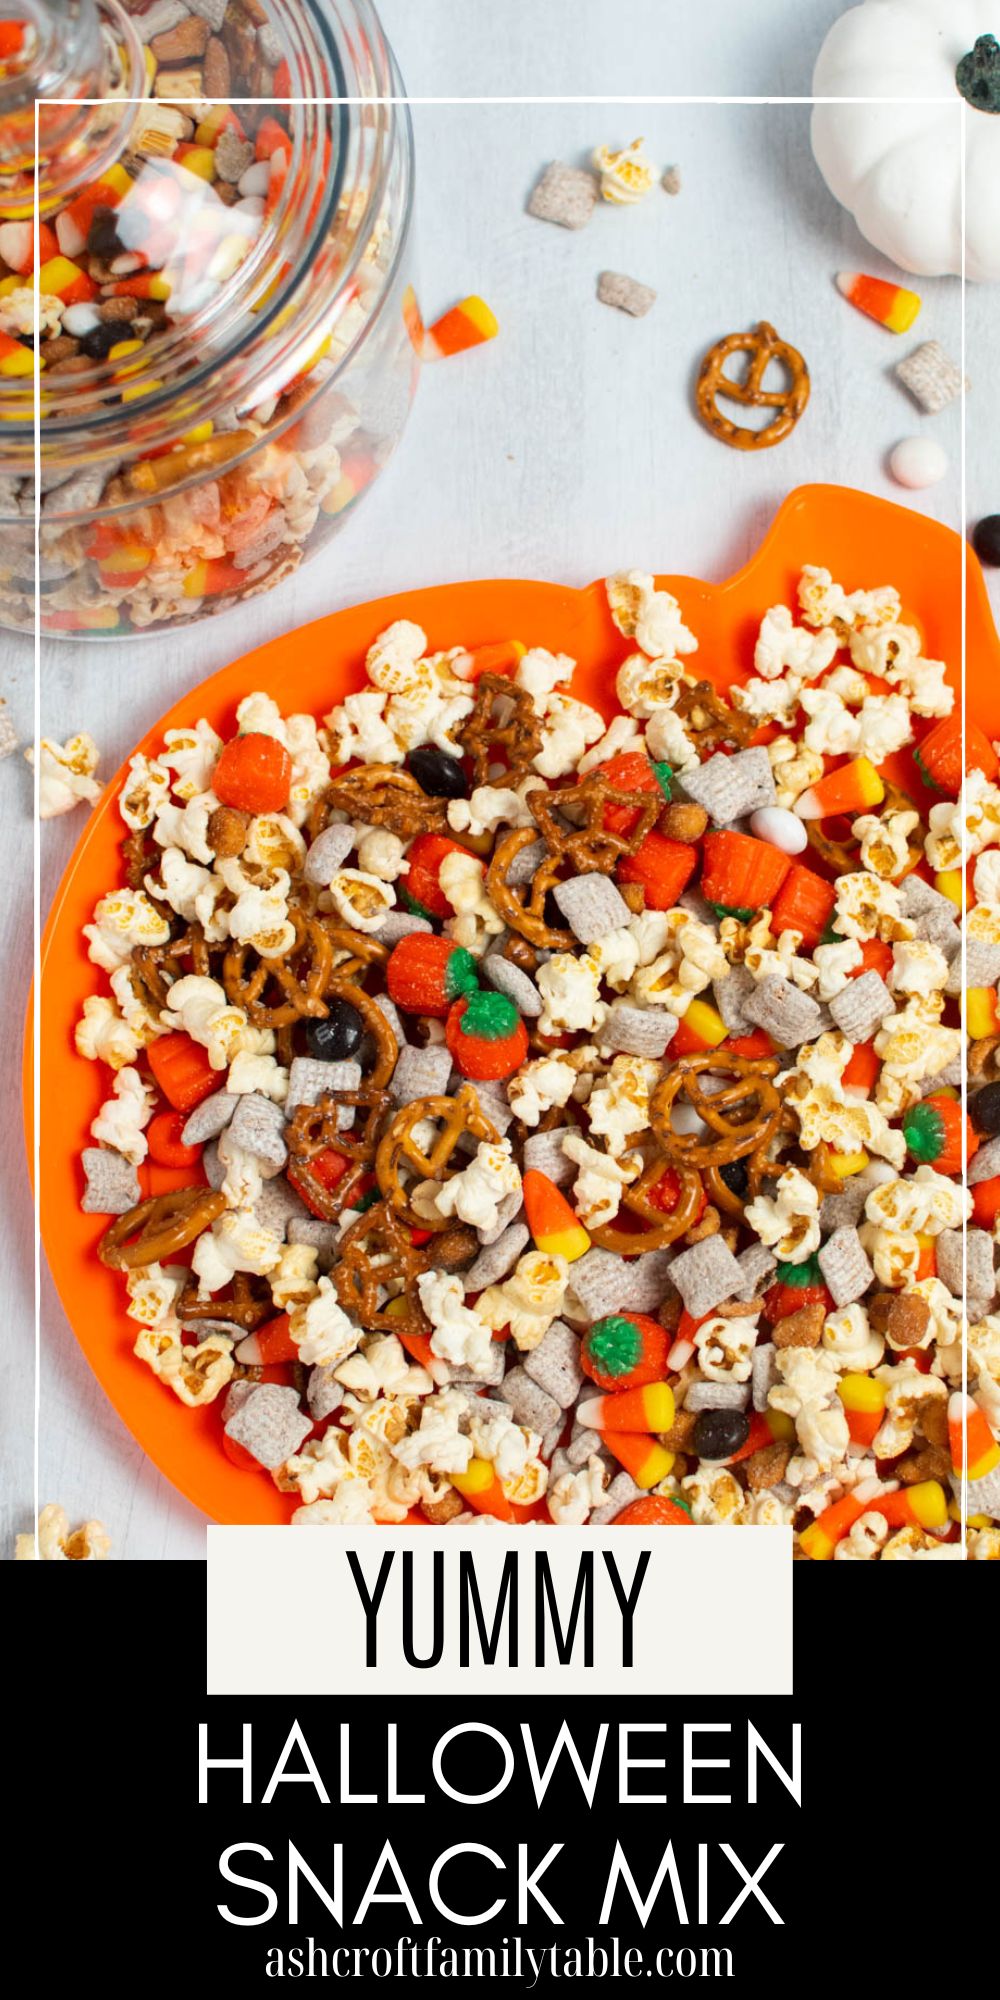 Pinterest graphic with text and photo of Halloween snack mix on orange pumpkin platter.